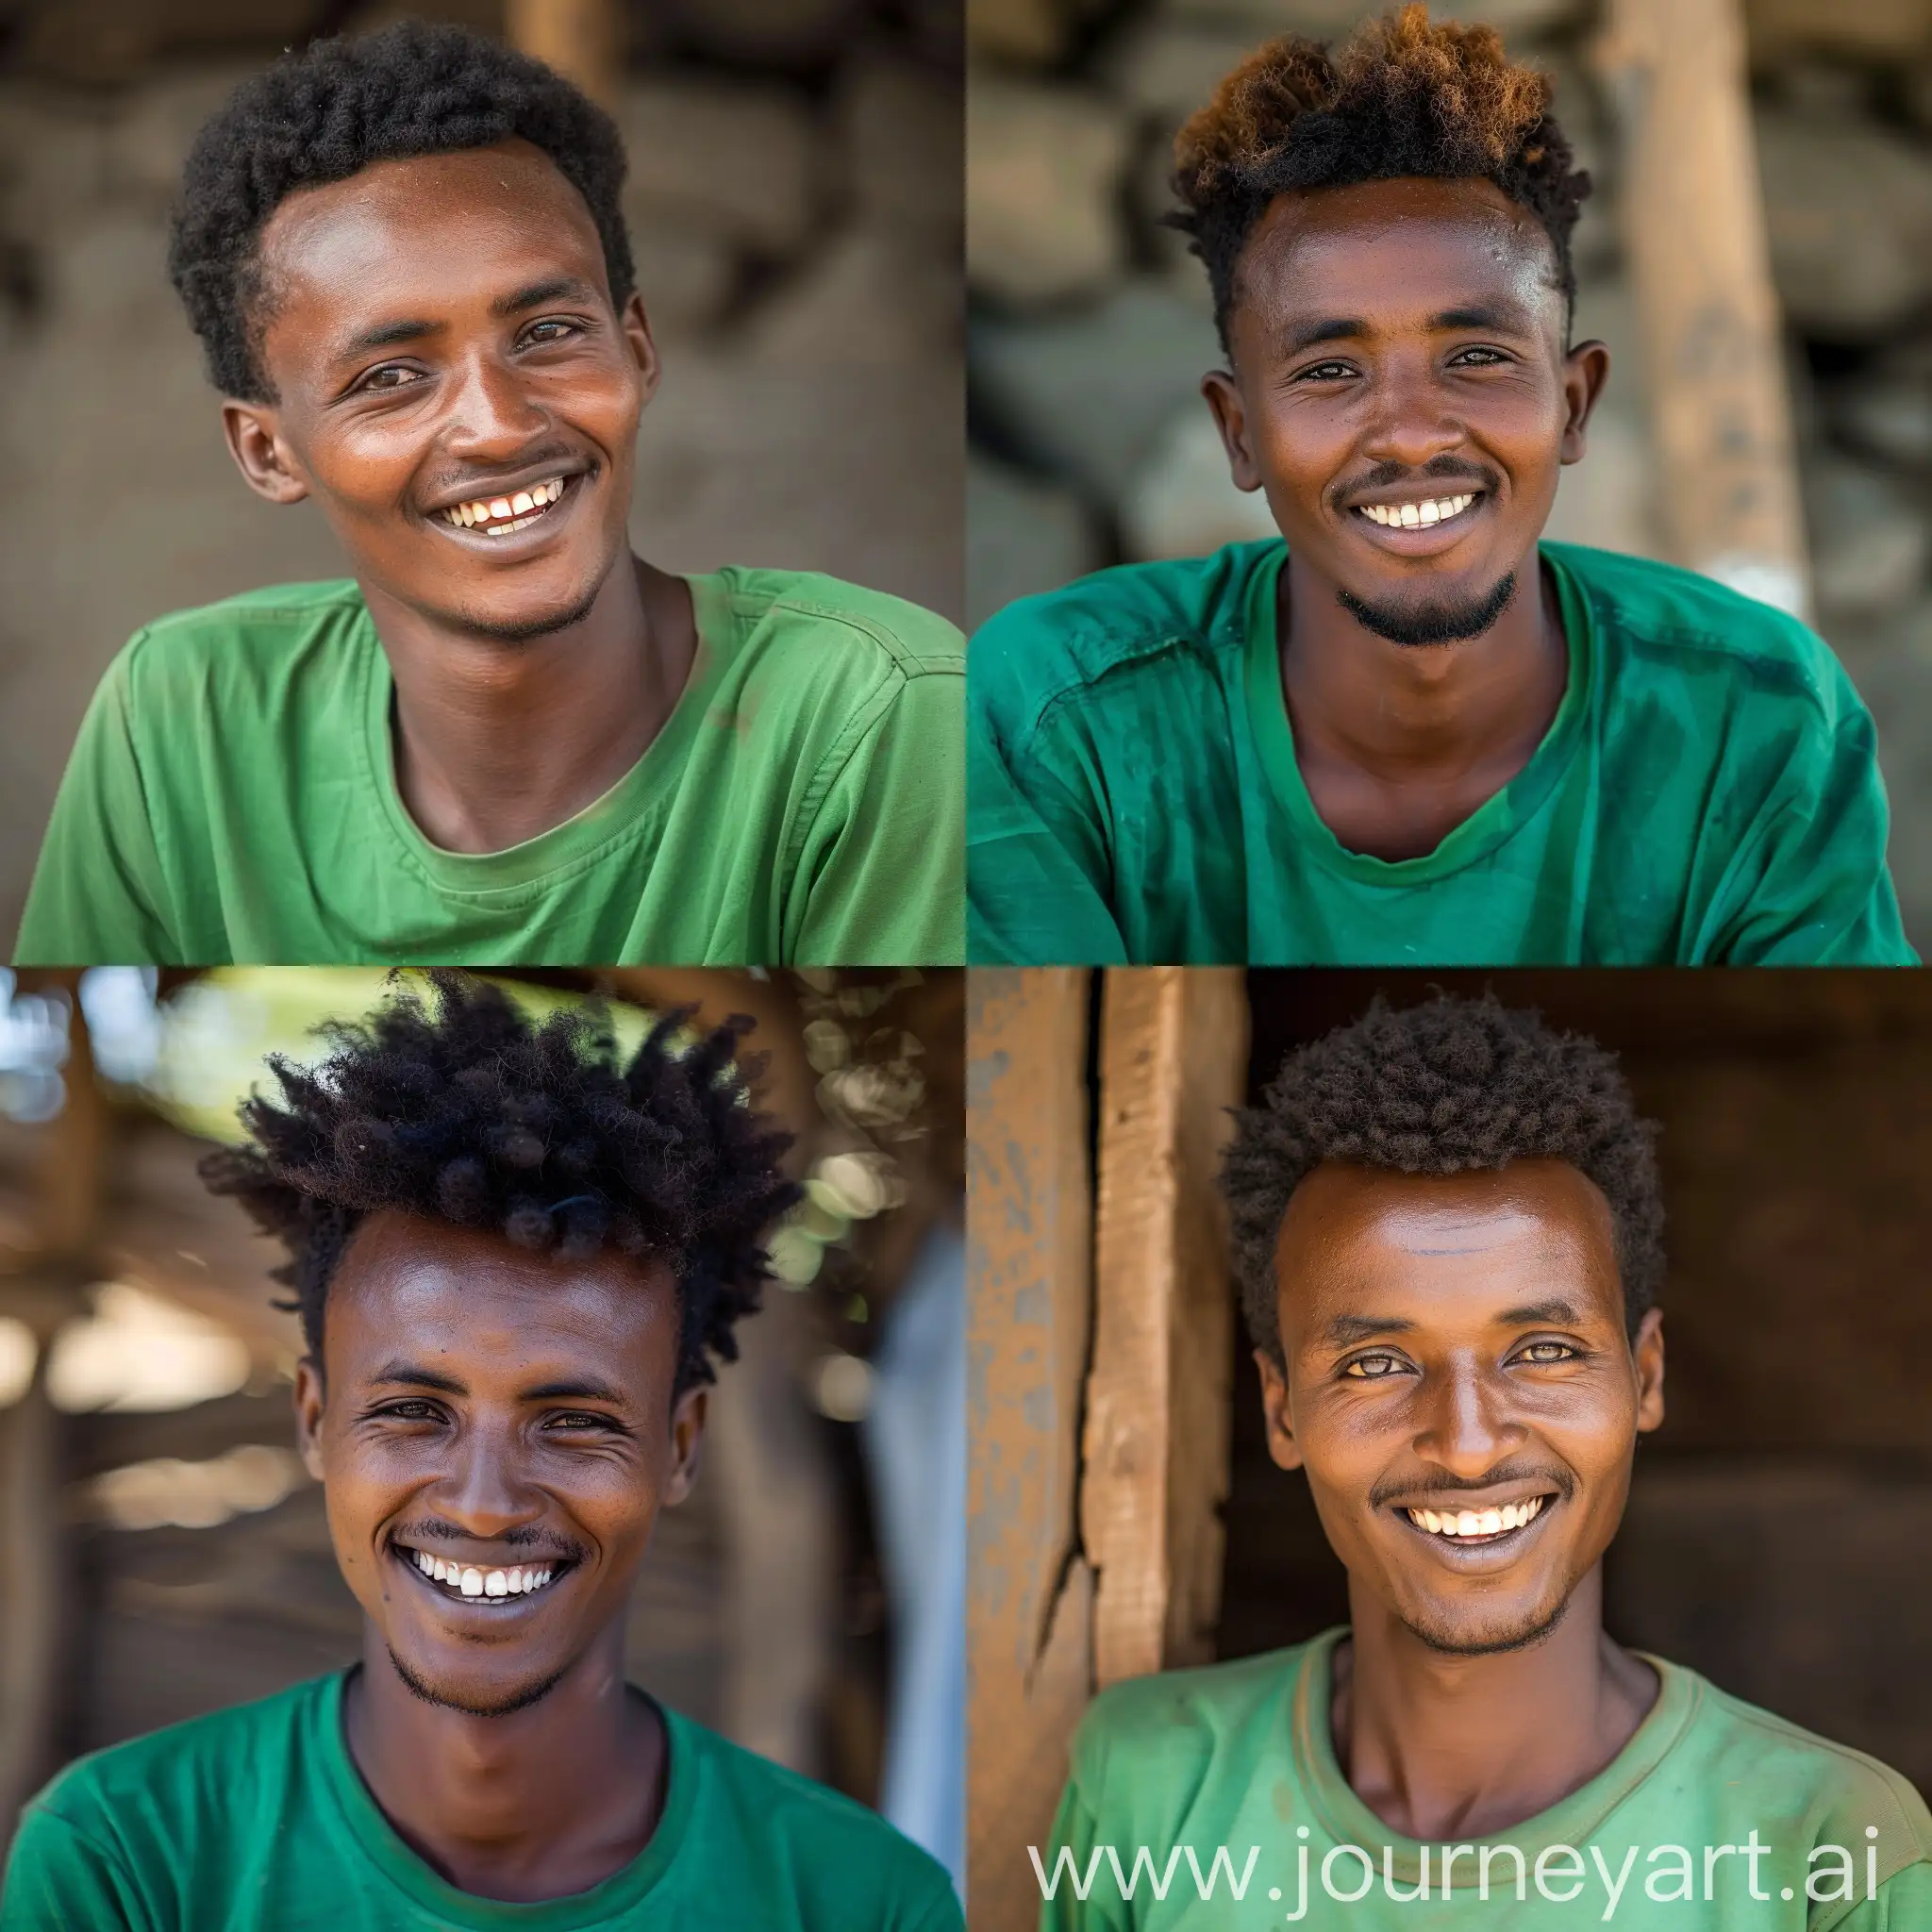 Ethiopian young man with green shirt and also smiling